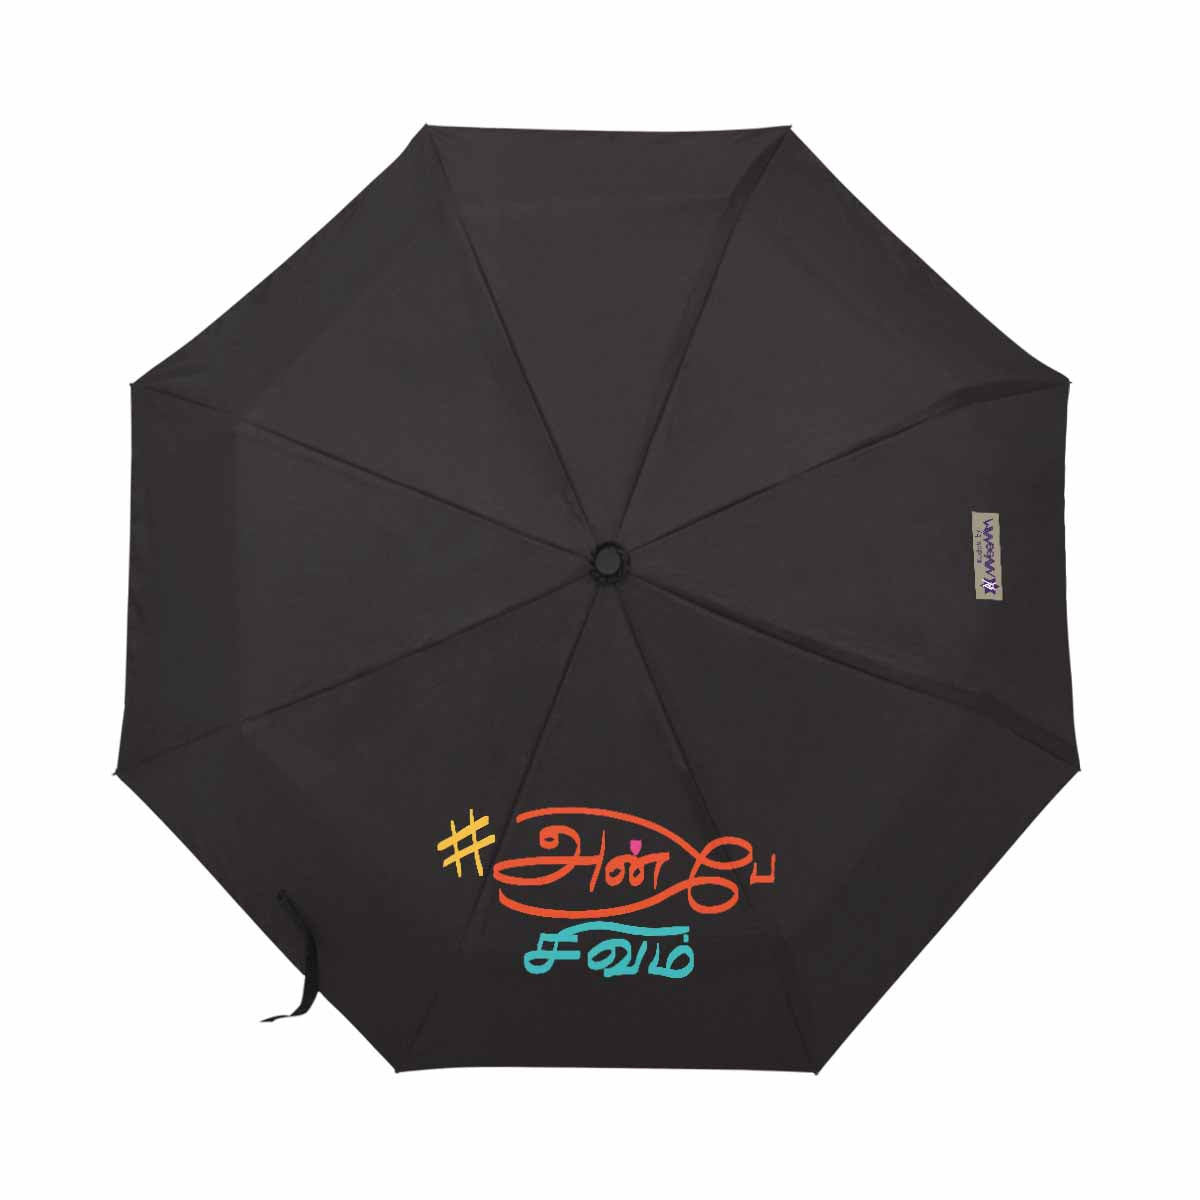 Black Thamizh automatic foldable umbrella anti-uv 21 inch Anbe Sivam gift idea for friends and family